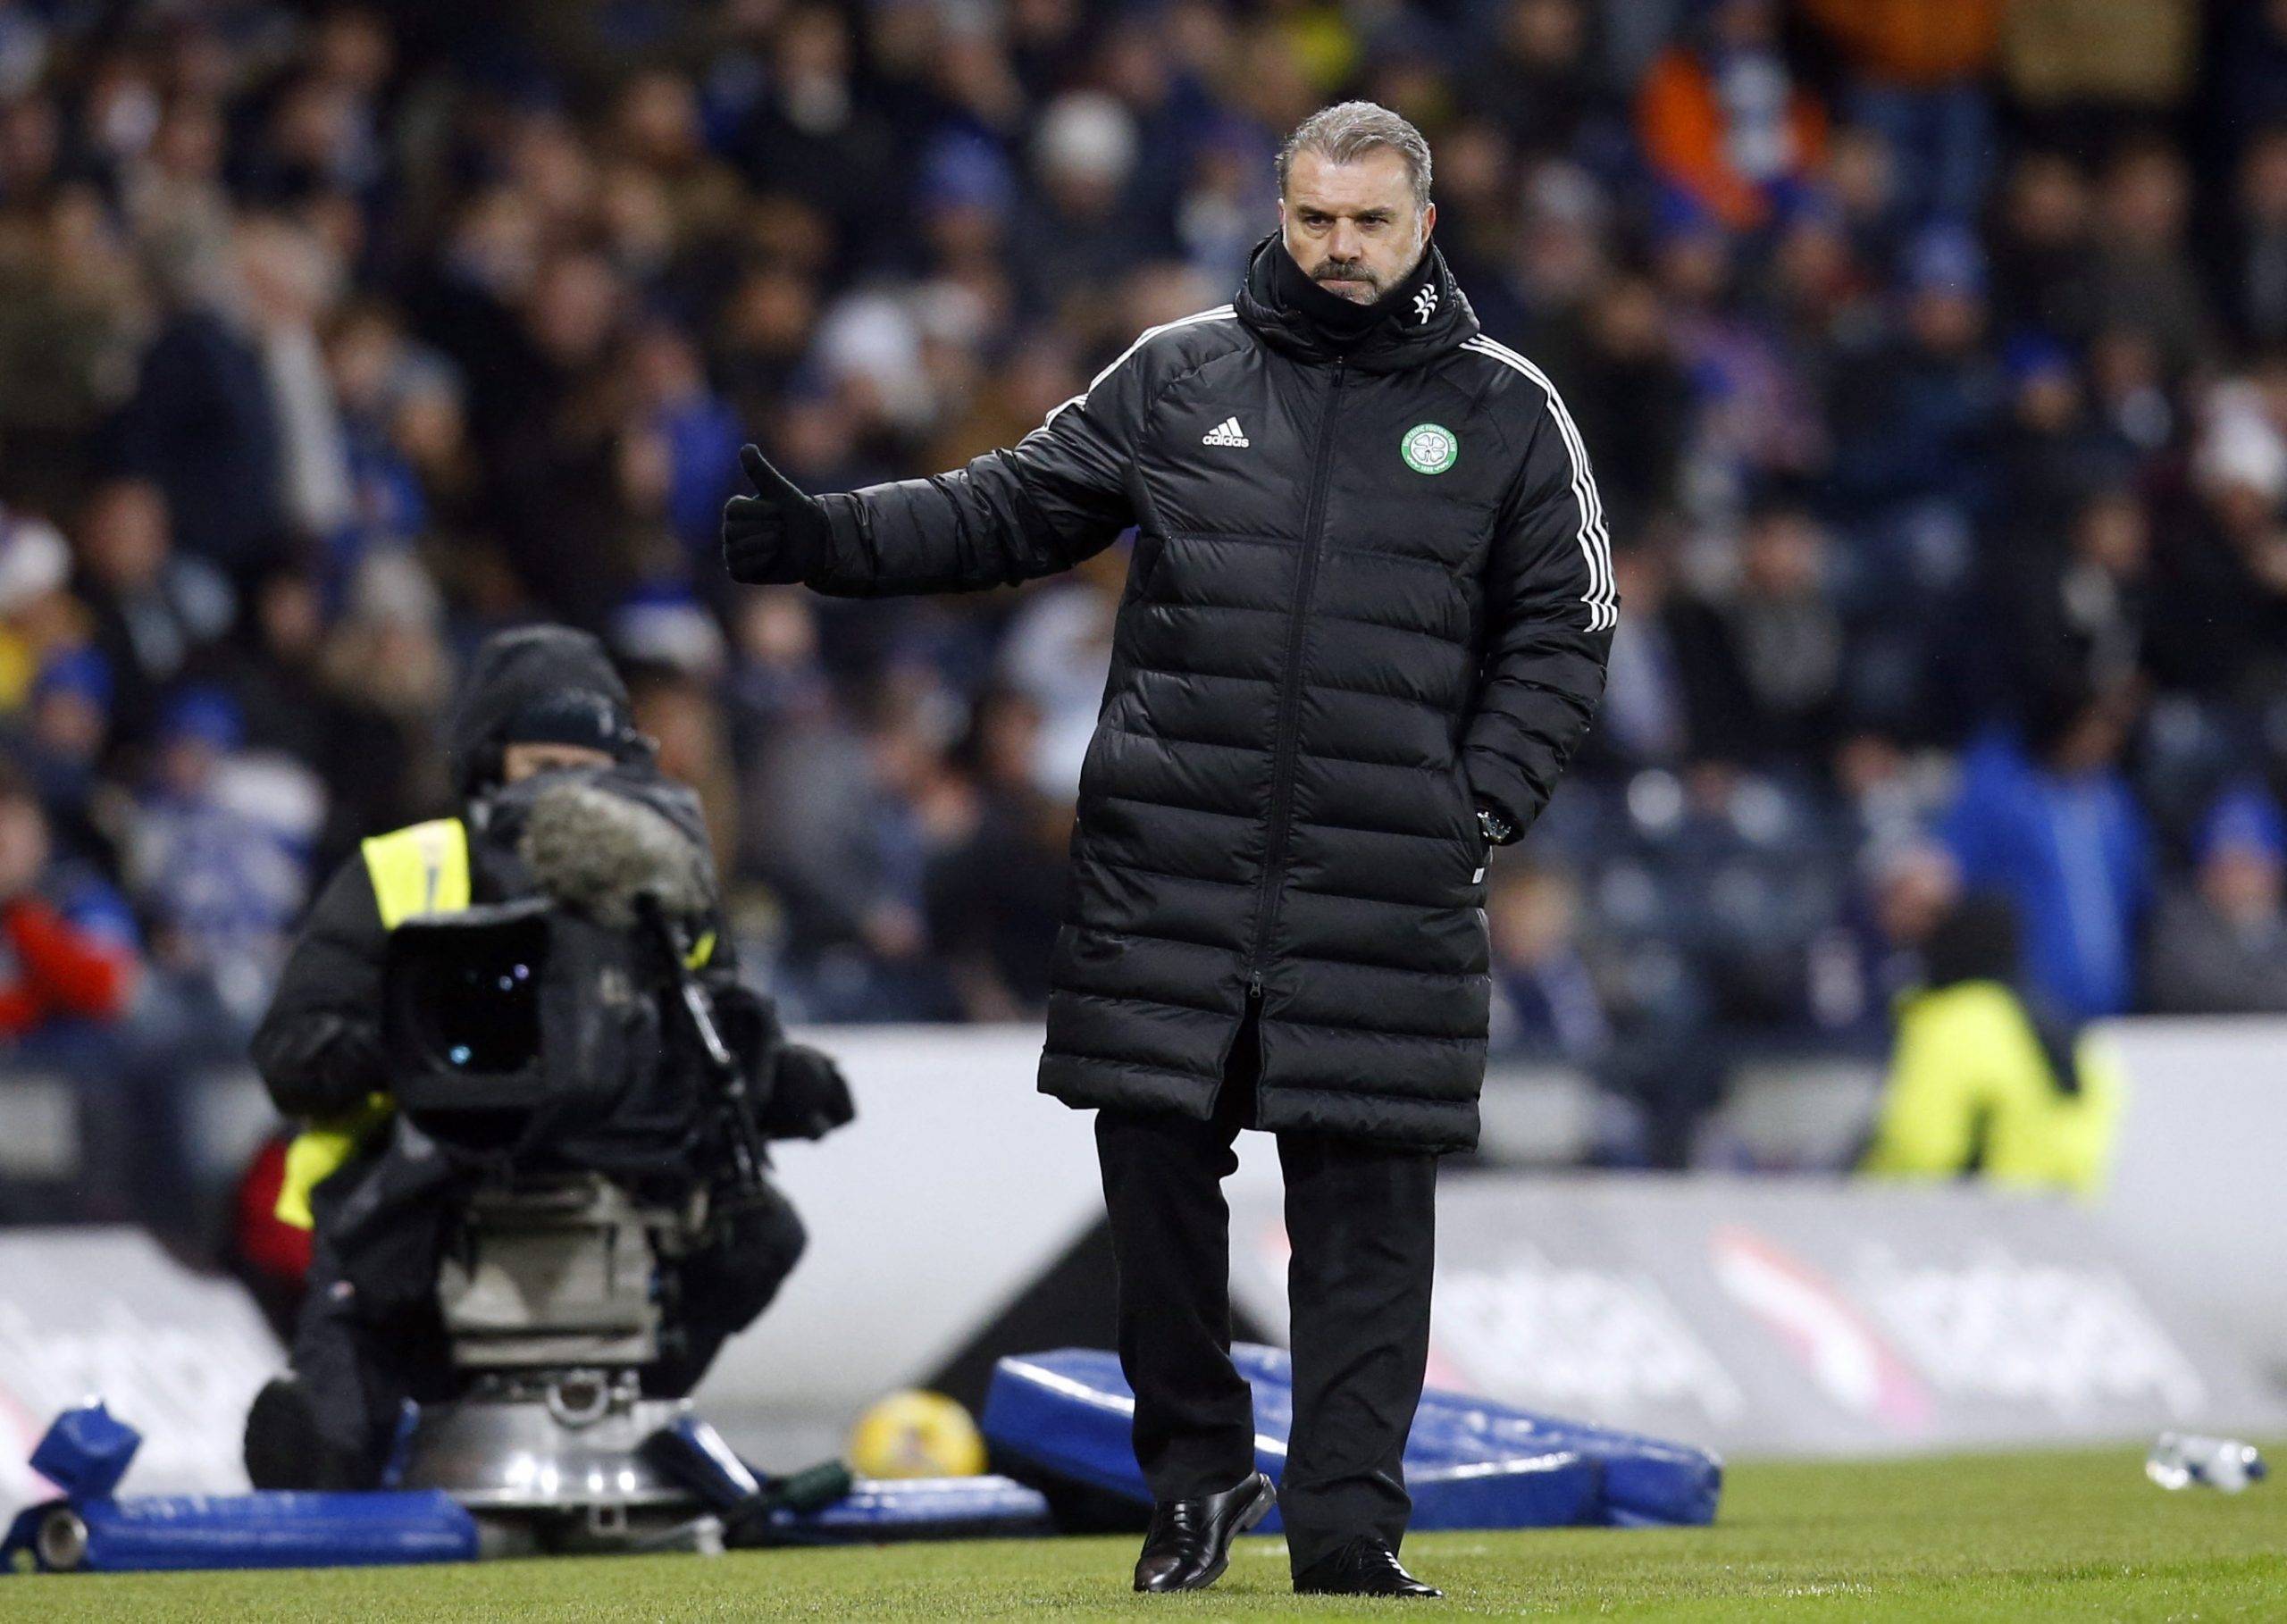 Celtic: Ange Postecoglou leaving is a 'never say never' situation - Celtic News